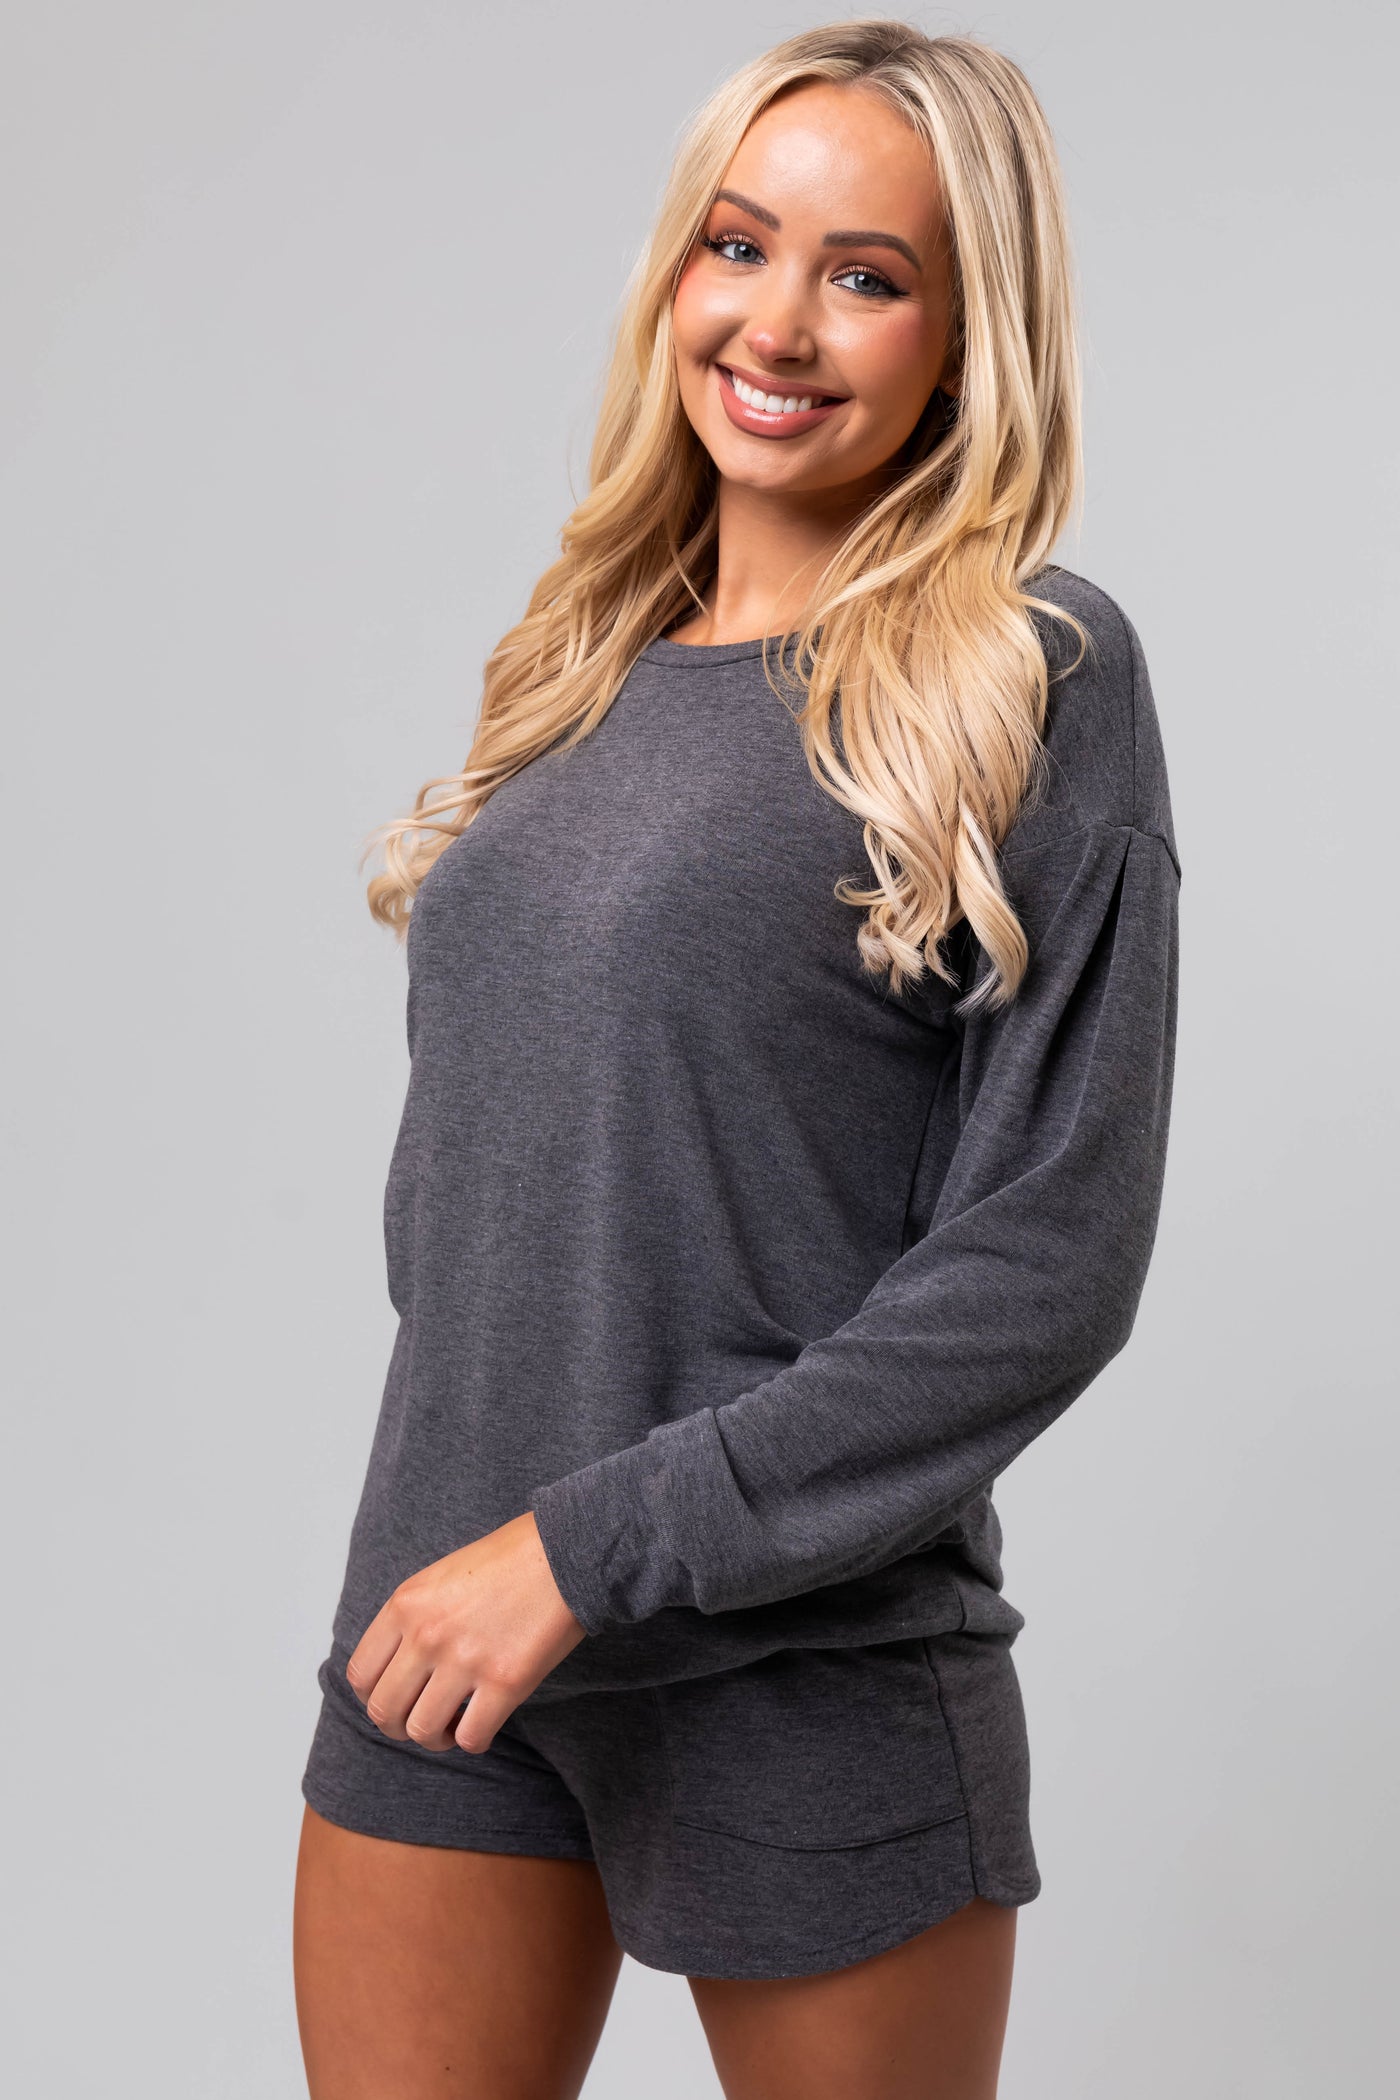 Heathered Charcoal Long Sleeve Soft Knit Top